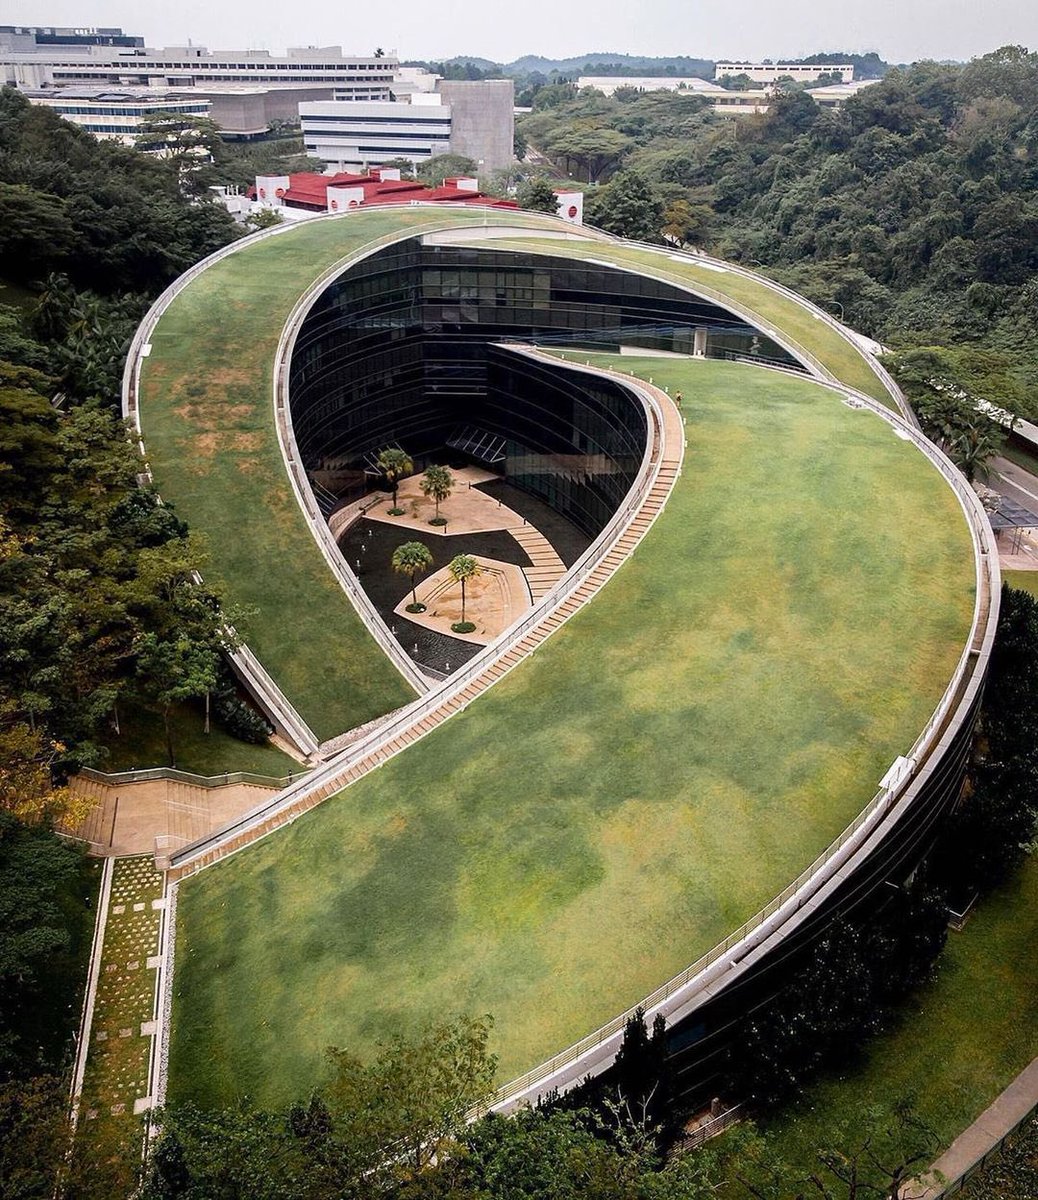 The Nanyang Technological University’s School of Art, Design, and Media in Singapore is home to a series of green roofs, designed by CPG Consultants, that refuse exile from the action.

📸 Photograph: NANCY

#greenroofs #roofgarden #roofgardens #sustainable #sustainability